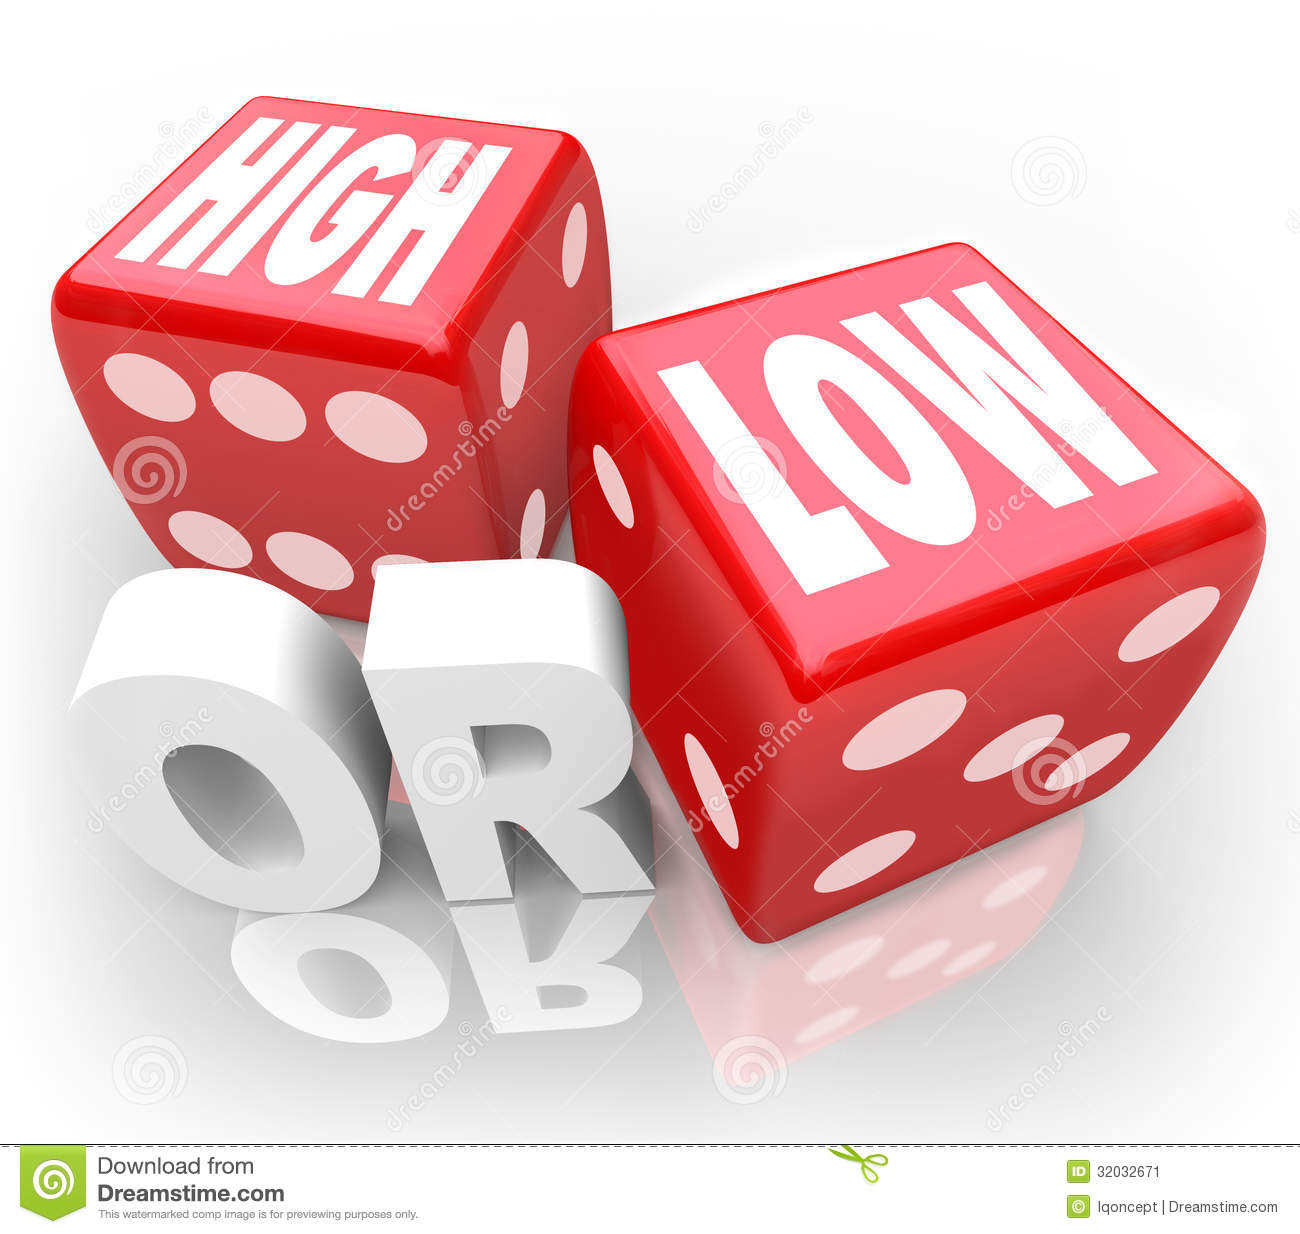 The Words High Or Low On Two Red Dice To Illustrate A Guessing Game Or